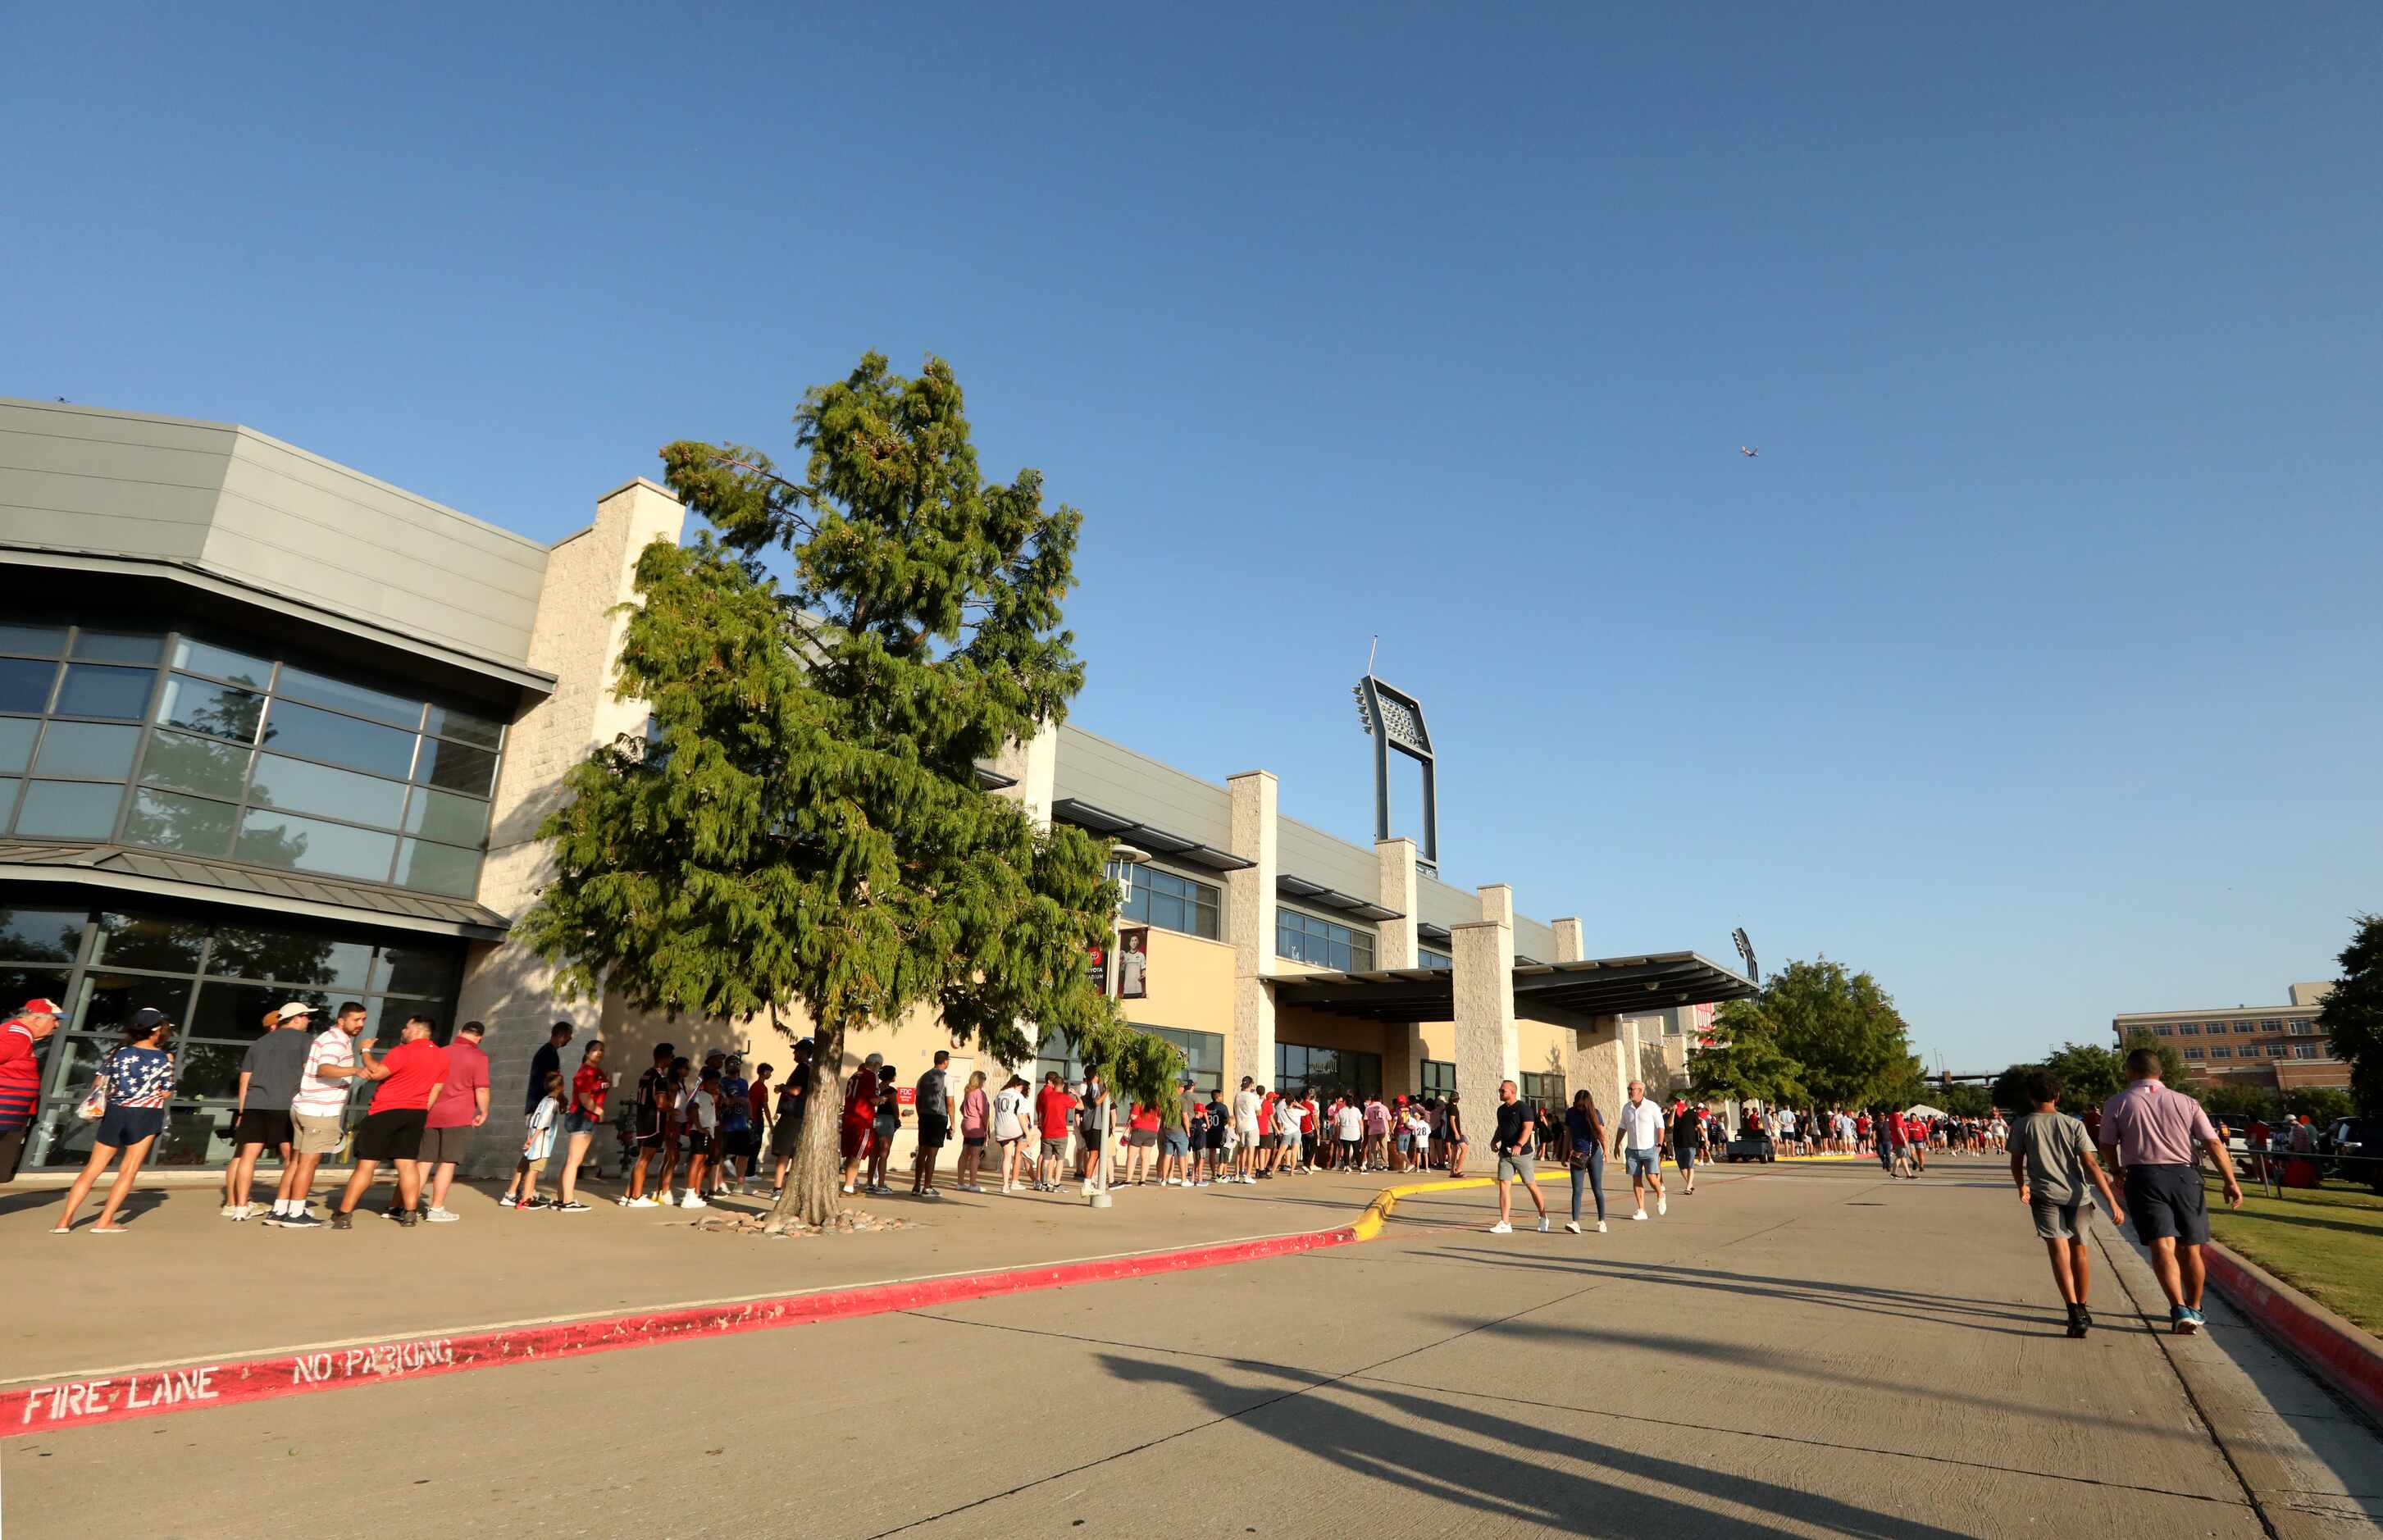 Fans wait for the gates to open for an FC Dallas game at Toyota Stadium in Frisco, TX, on...